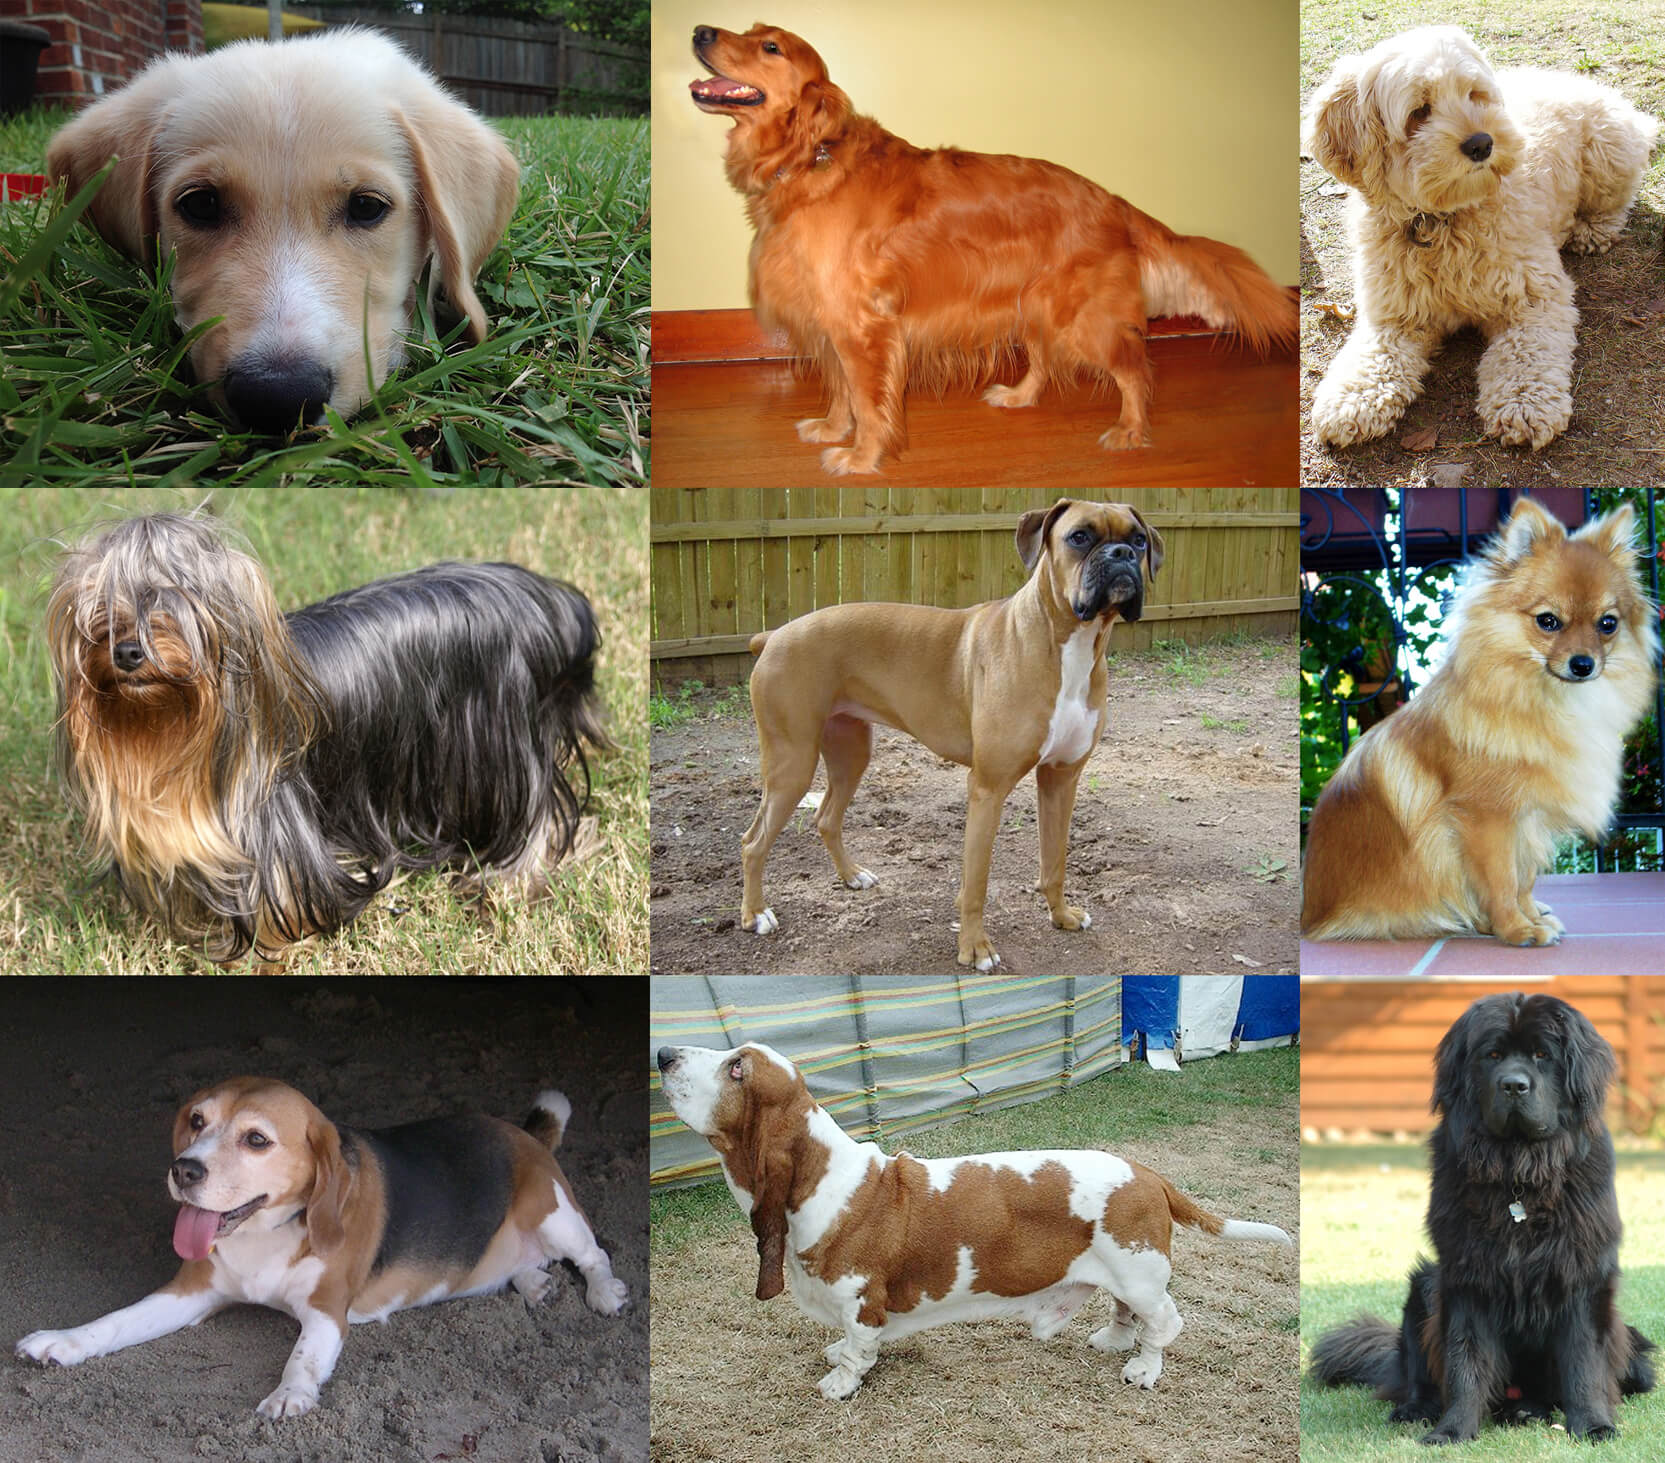 How to find out what breed your dog is?